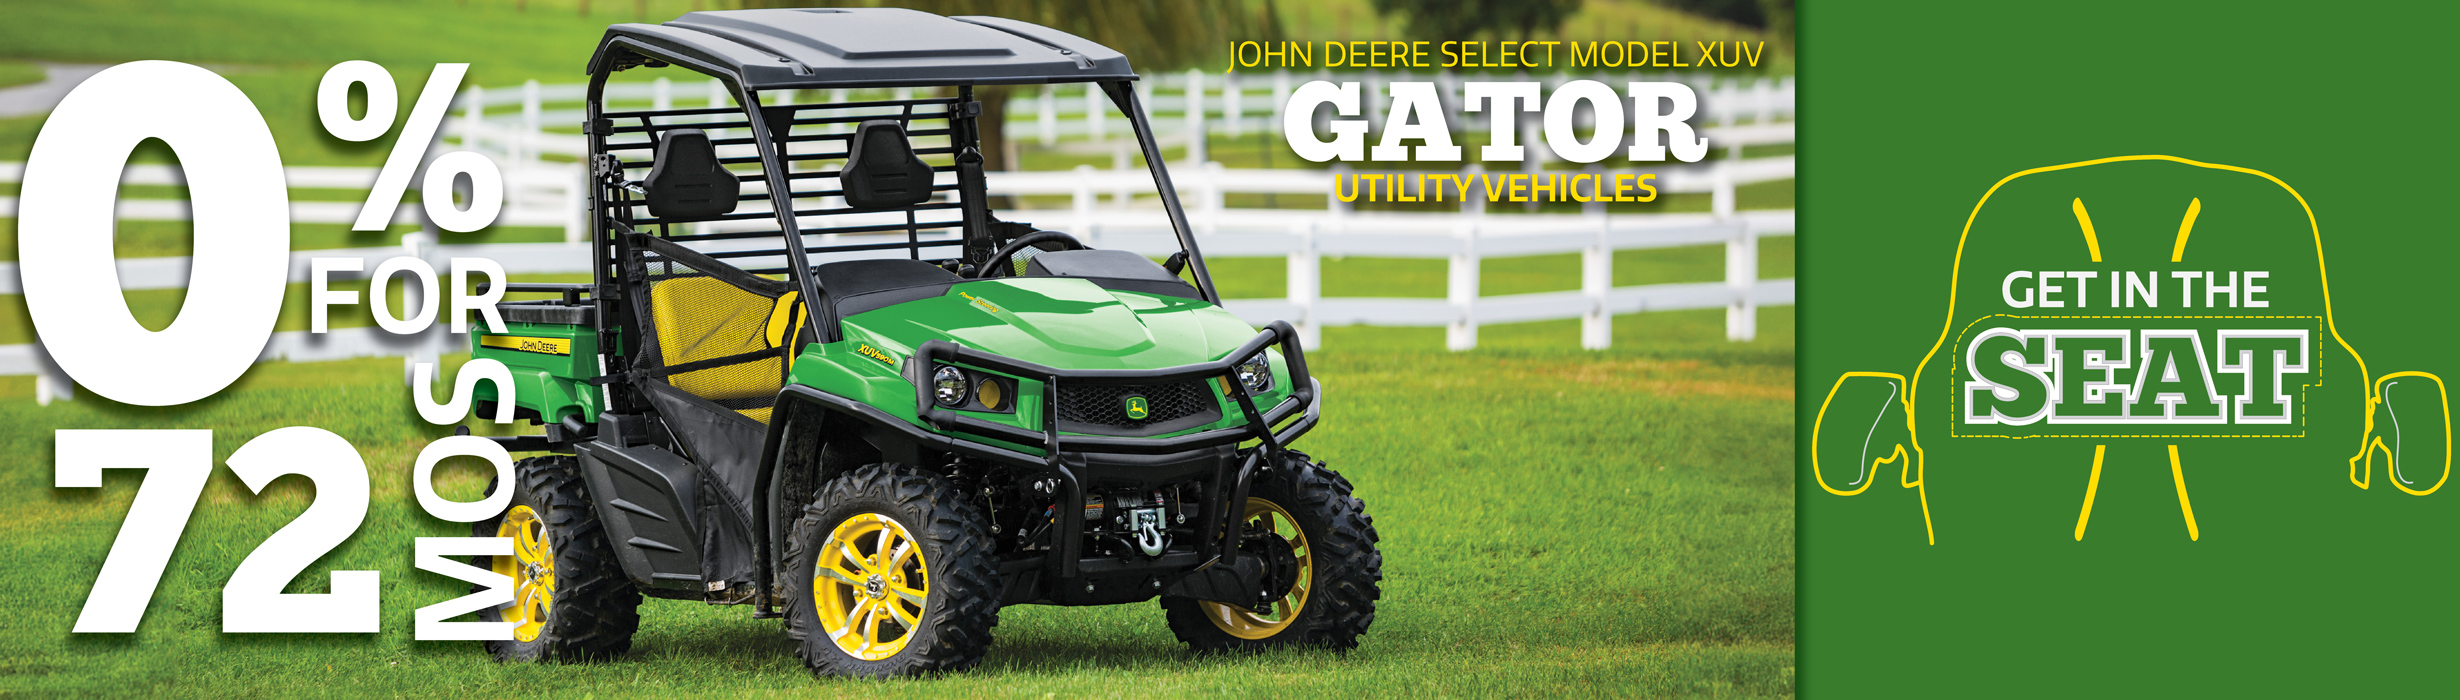 Get in the seat and get 0% for 72 months on select Gators!